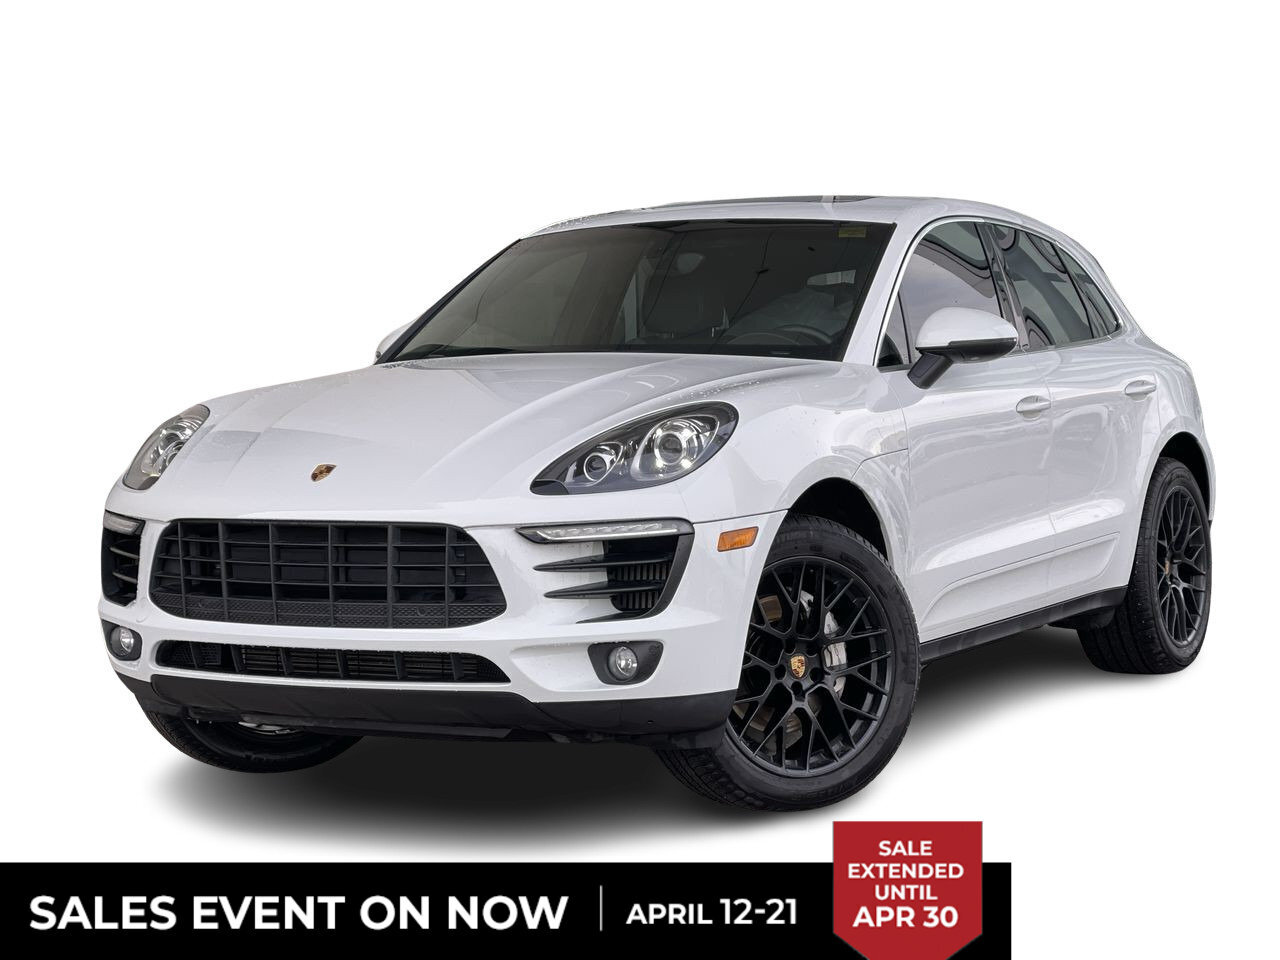 2015 Porsche Macan S Macan S, AWD, Local trade Accident free, Winter 